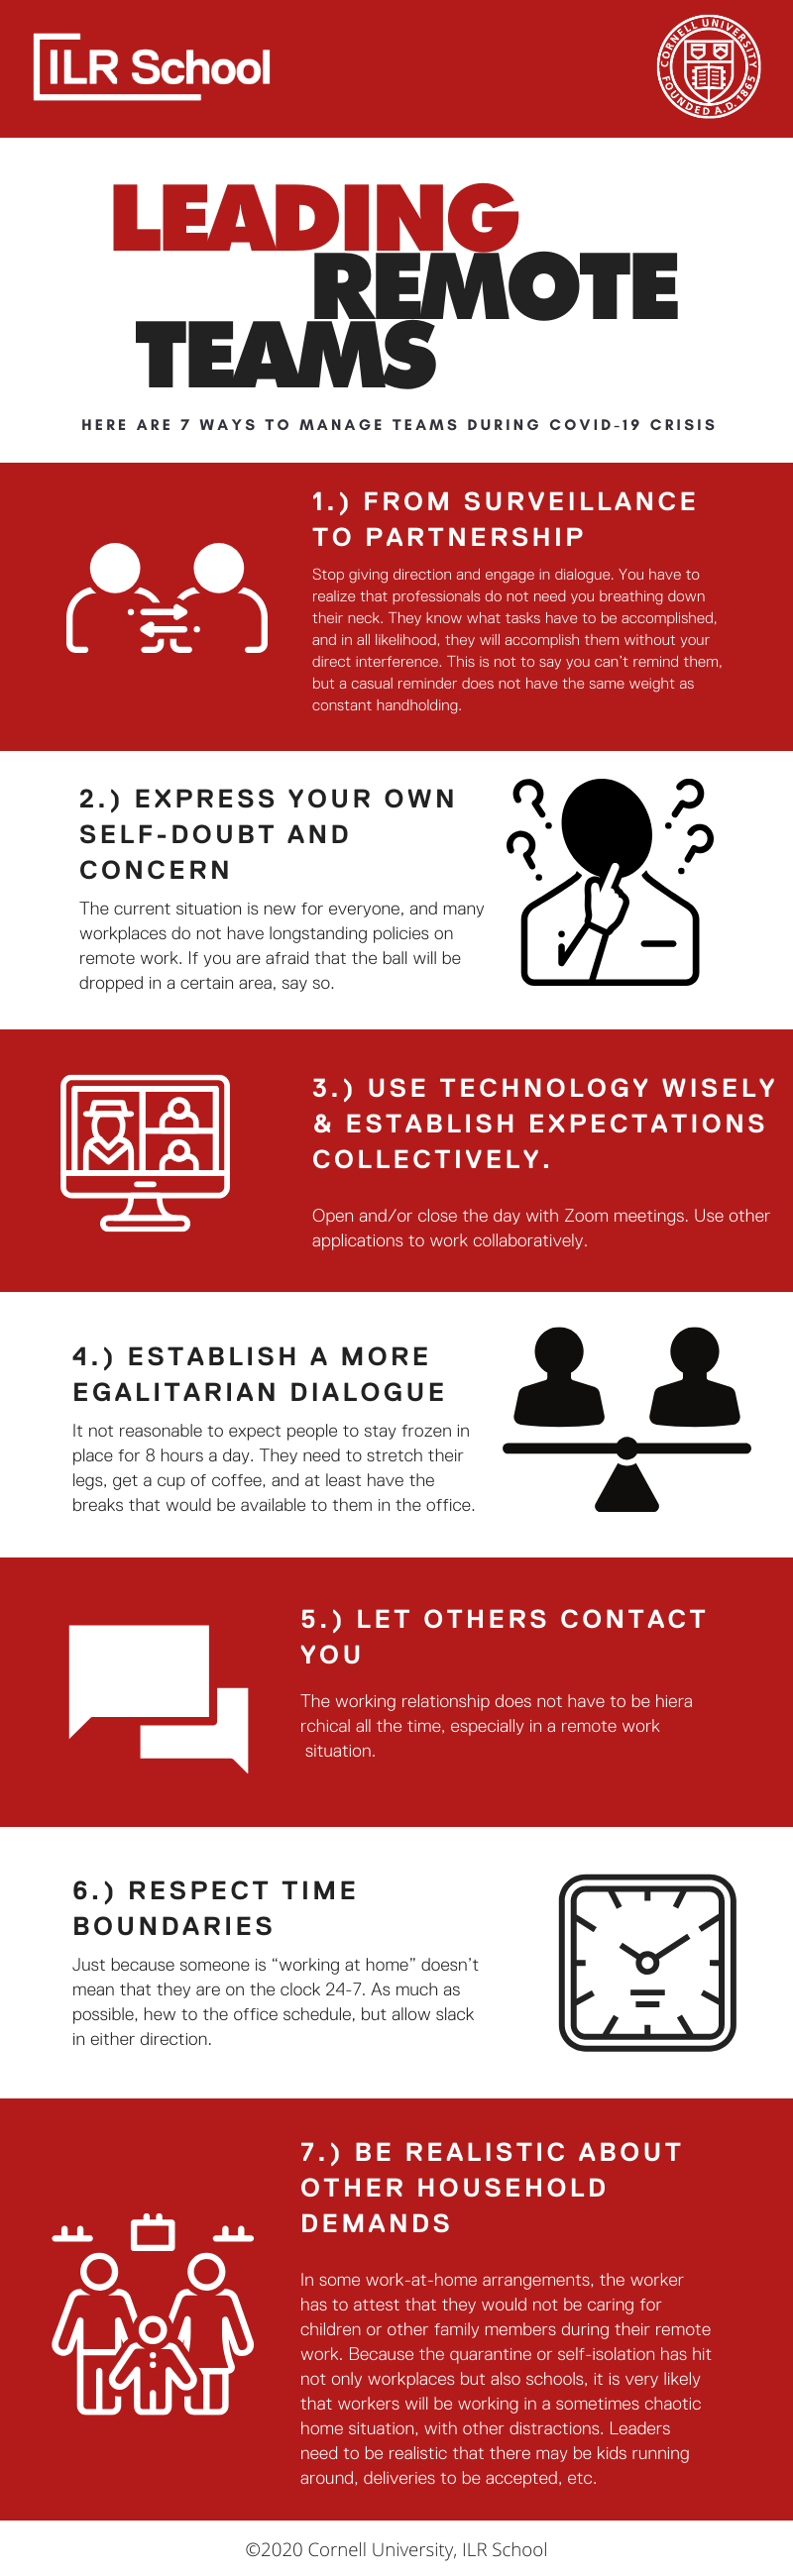 Infographic showing 7 steps to better managing remote teams.